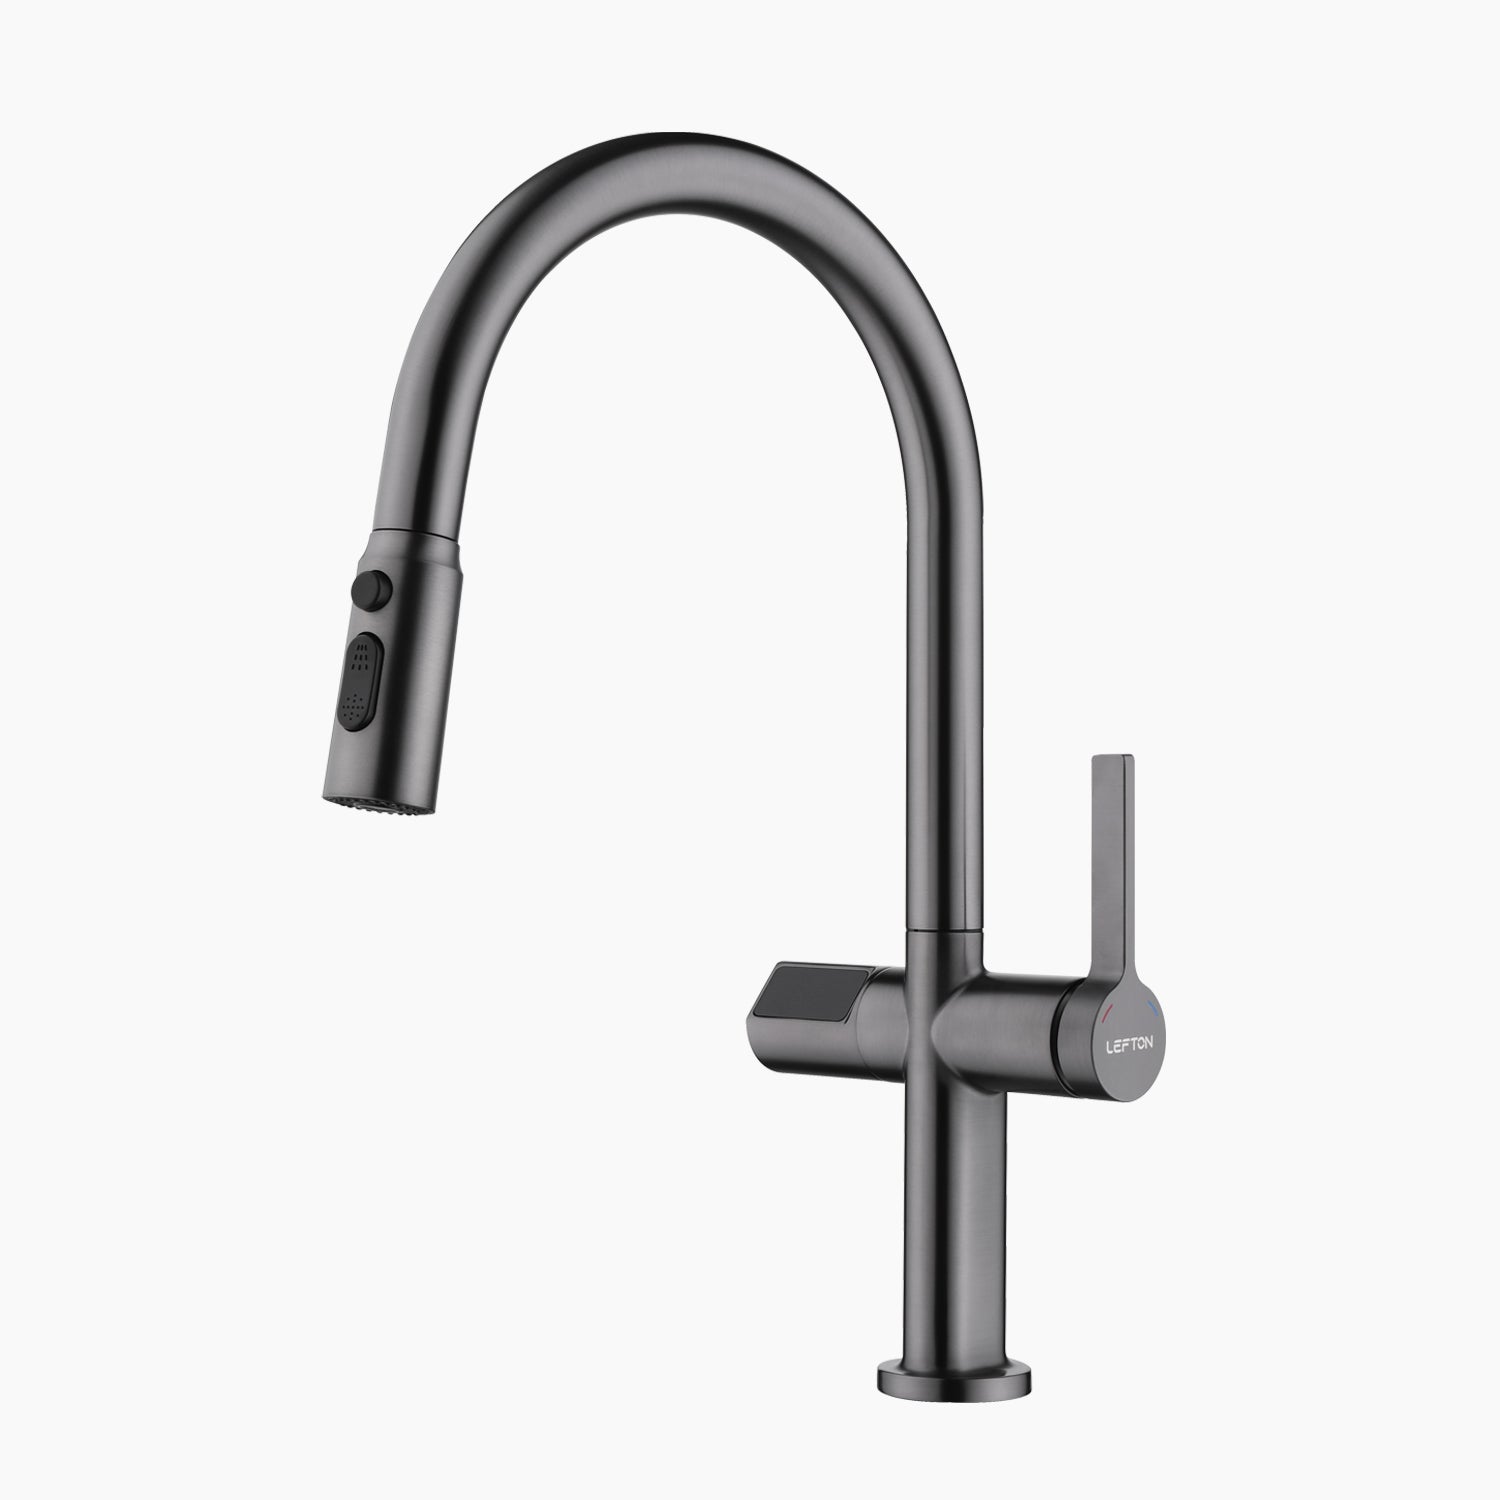 Lefton Automatic Sensor & Pull-Down Kitchen Faucet with Temperature Display-KF2206 -Kitchen Faucets- Lefton Home